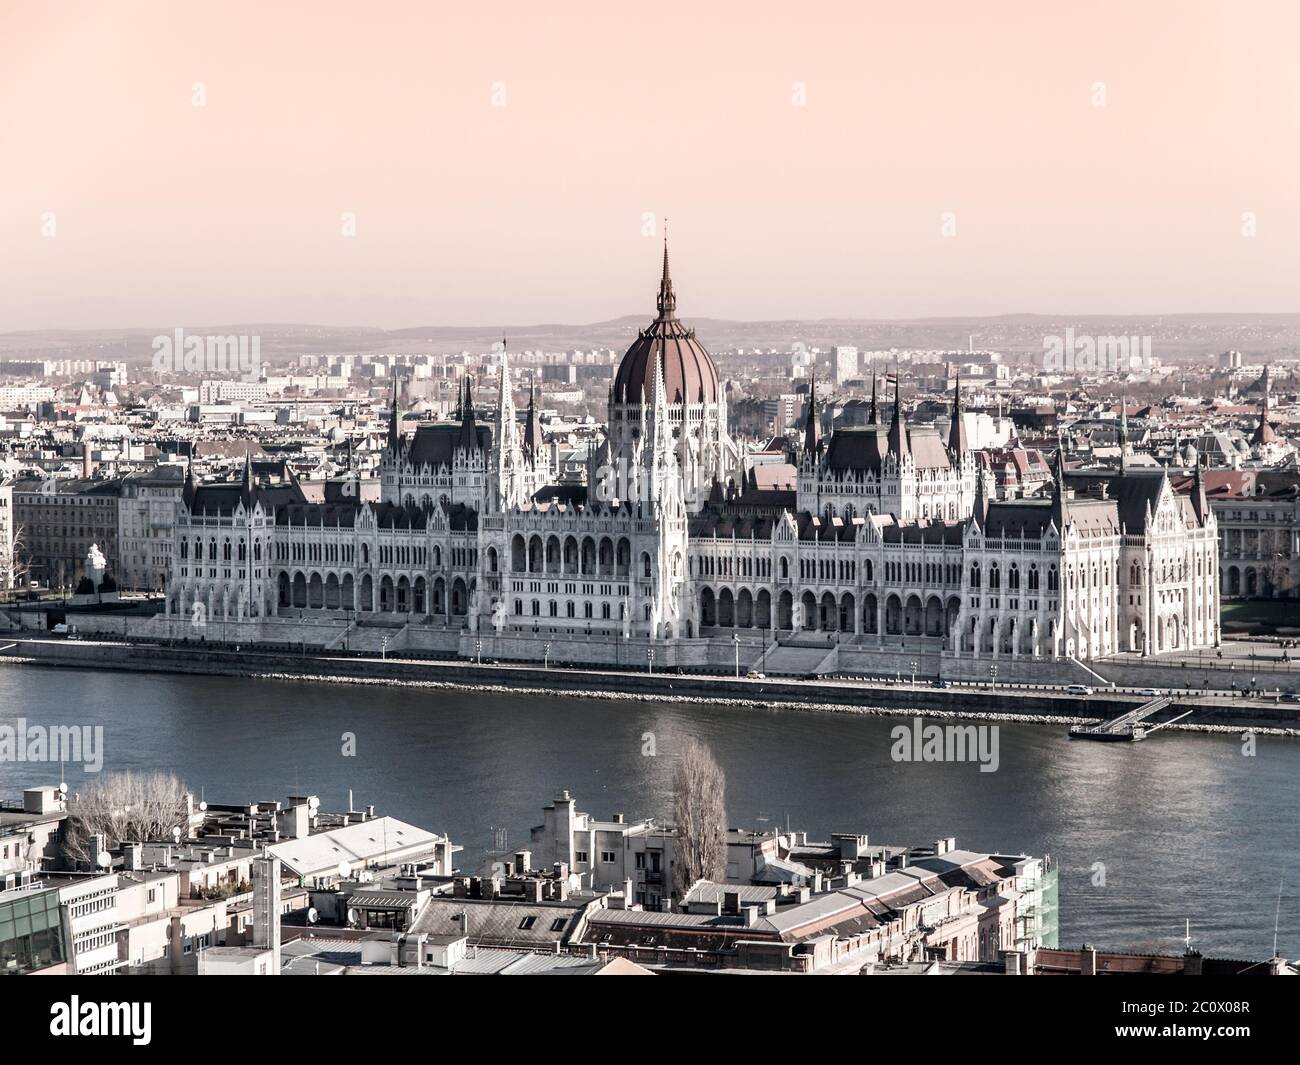 Hungarian Parliament, aka Orszaghaz, historical building on Danube riverbank in the centre of Budapest, Hungary, Europe. UNESCO World Heritage Site. Stock Photo